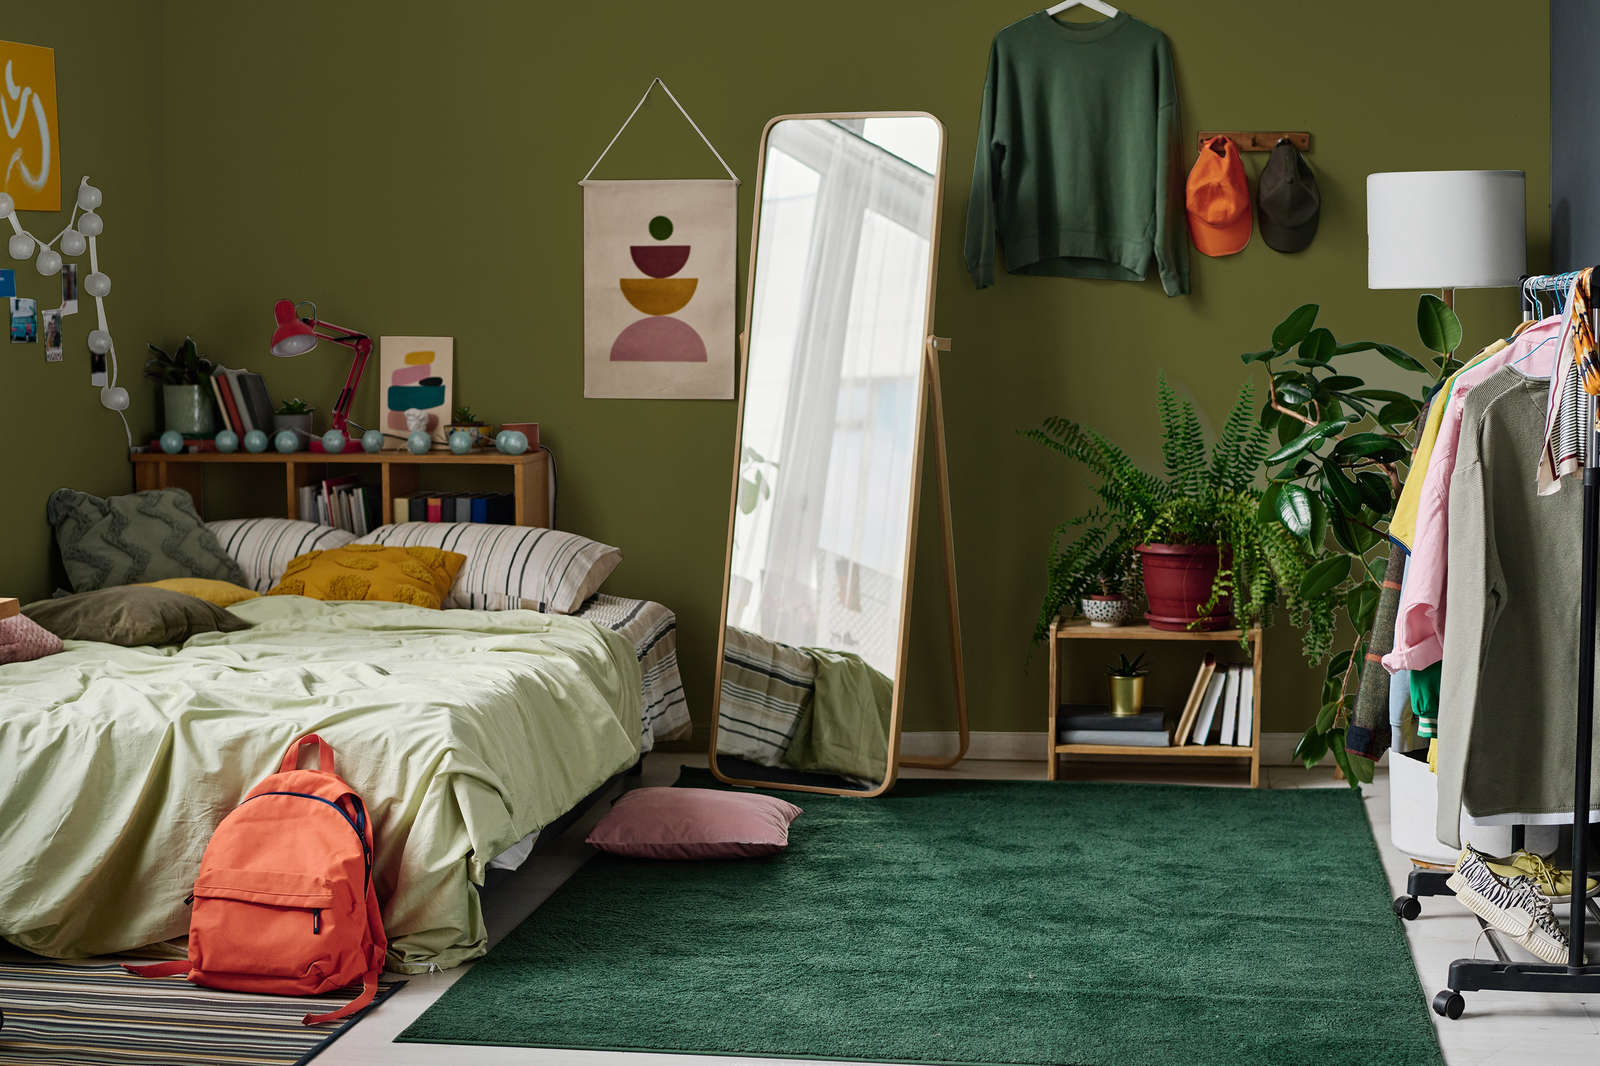             Premium Wall Paint Nature Forest Green »Lucky Lime« NW609 – 5 litre
        